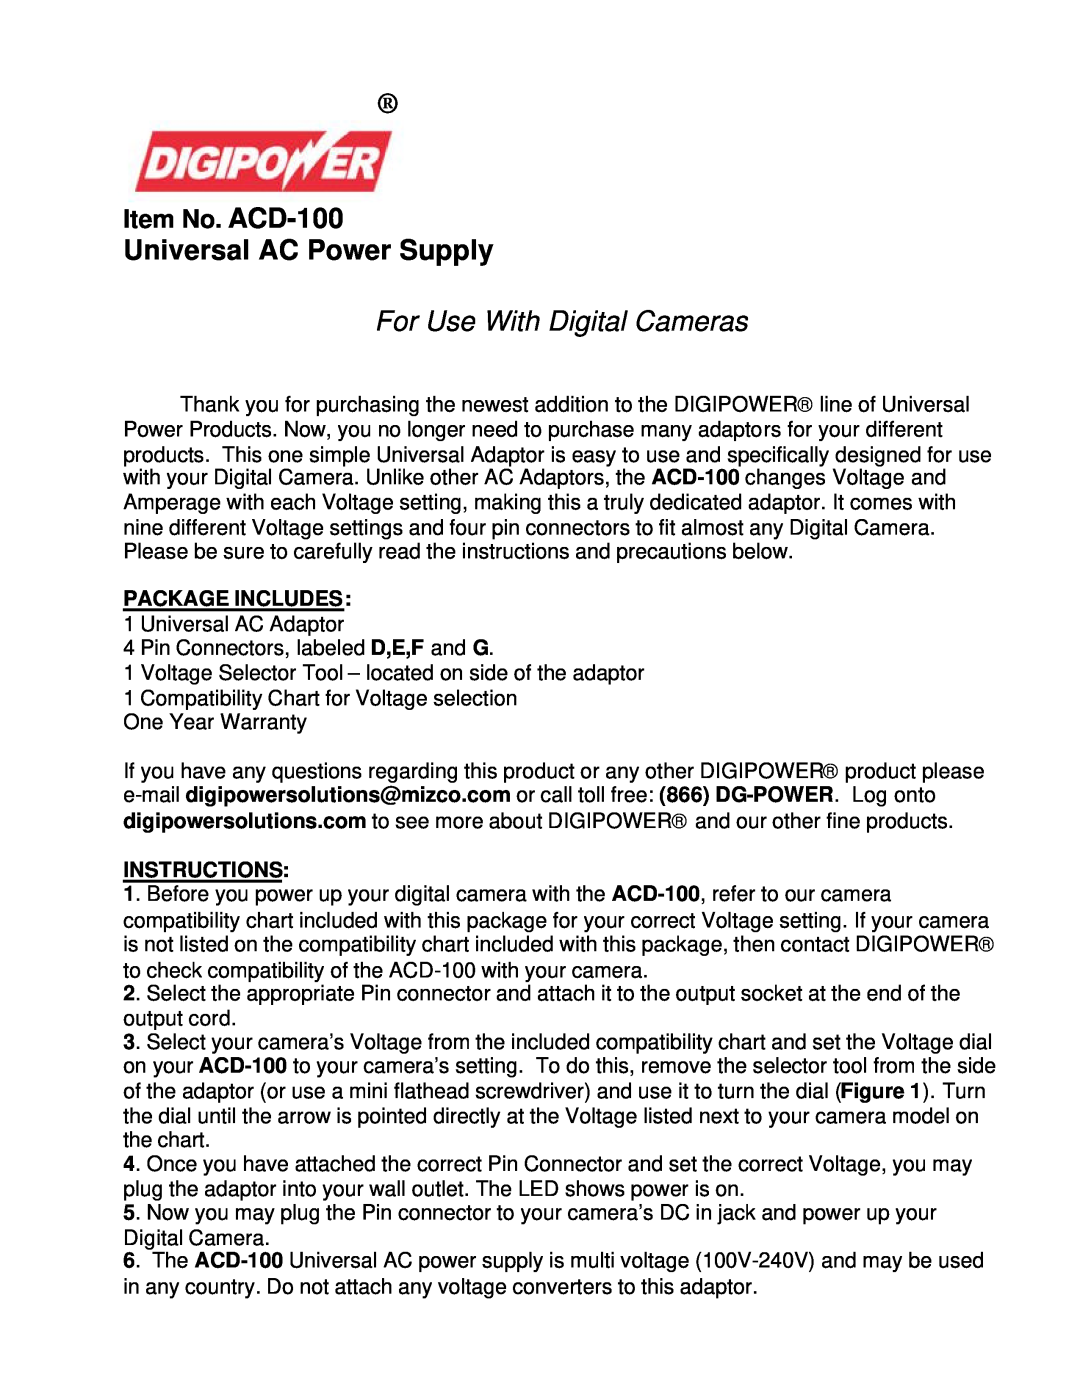 DigiPower ACD-100 warranty Introduction, Please carefully read the instructions below, Package Includes, Instructions 